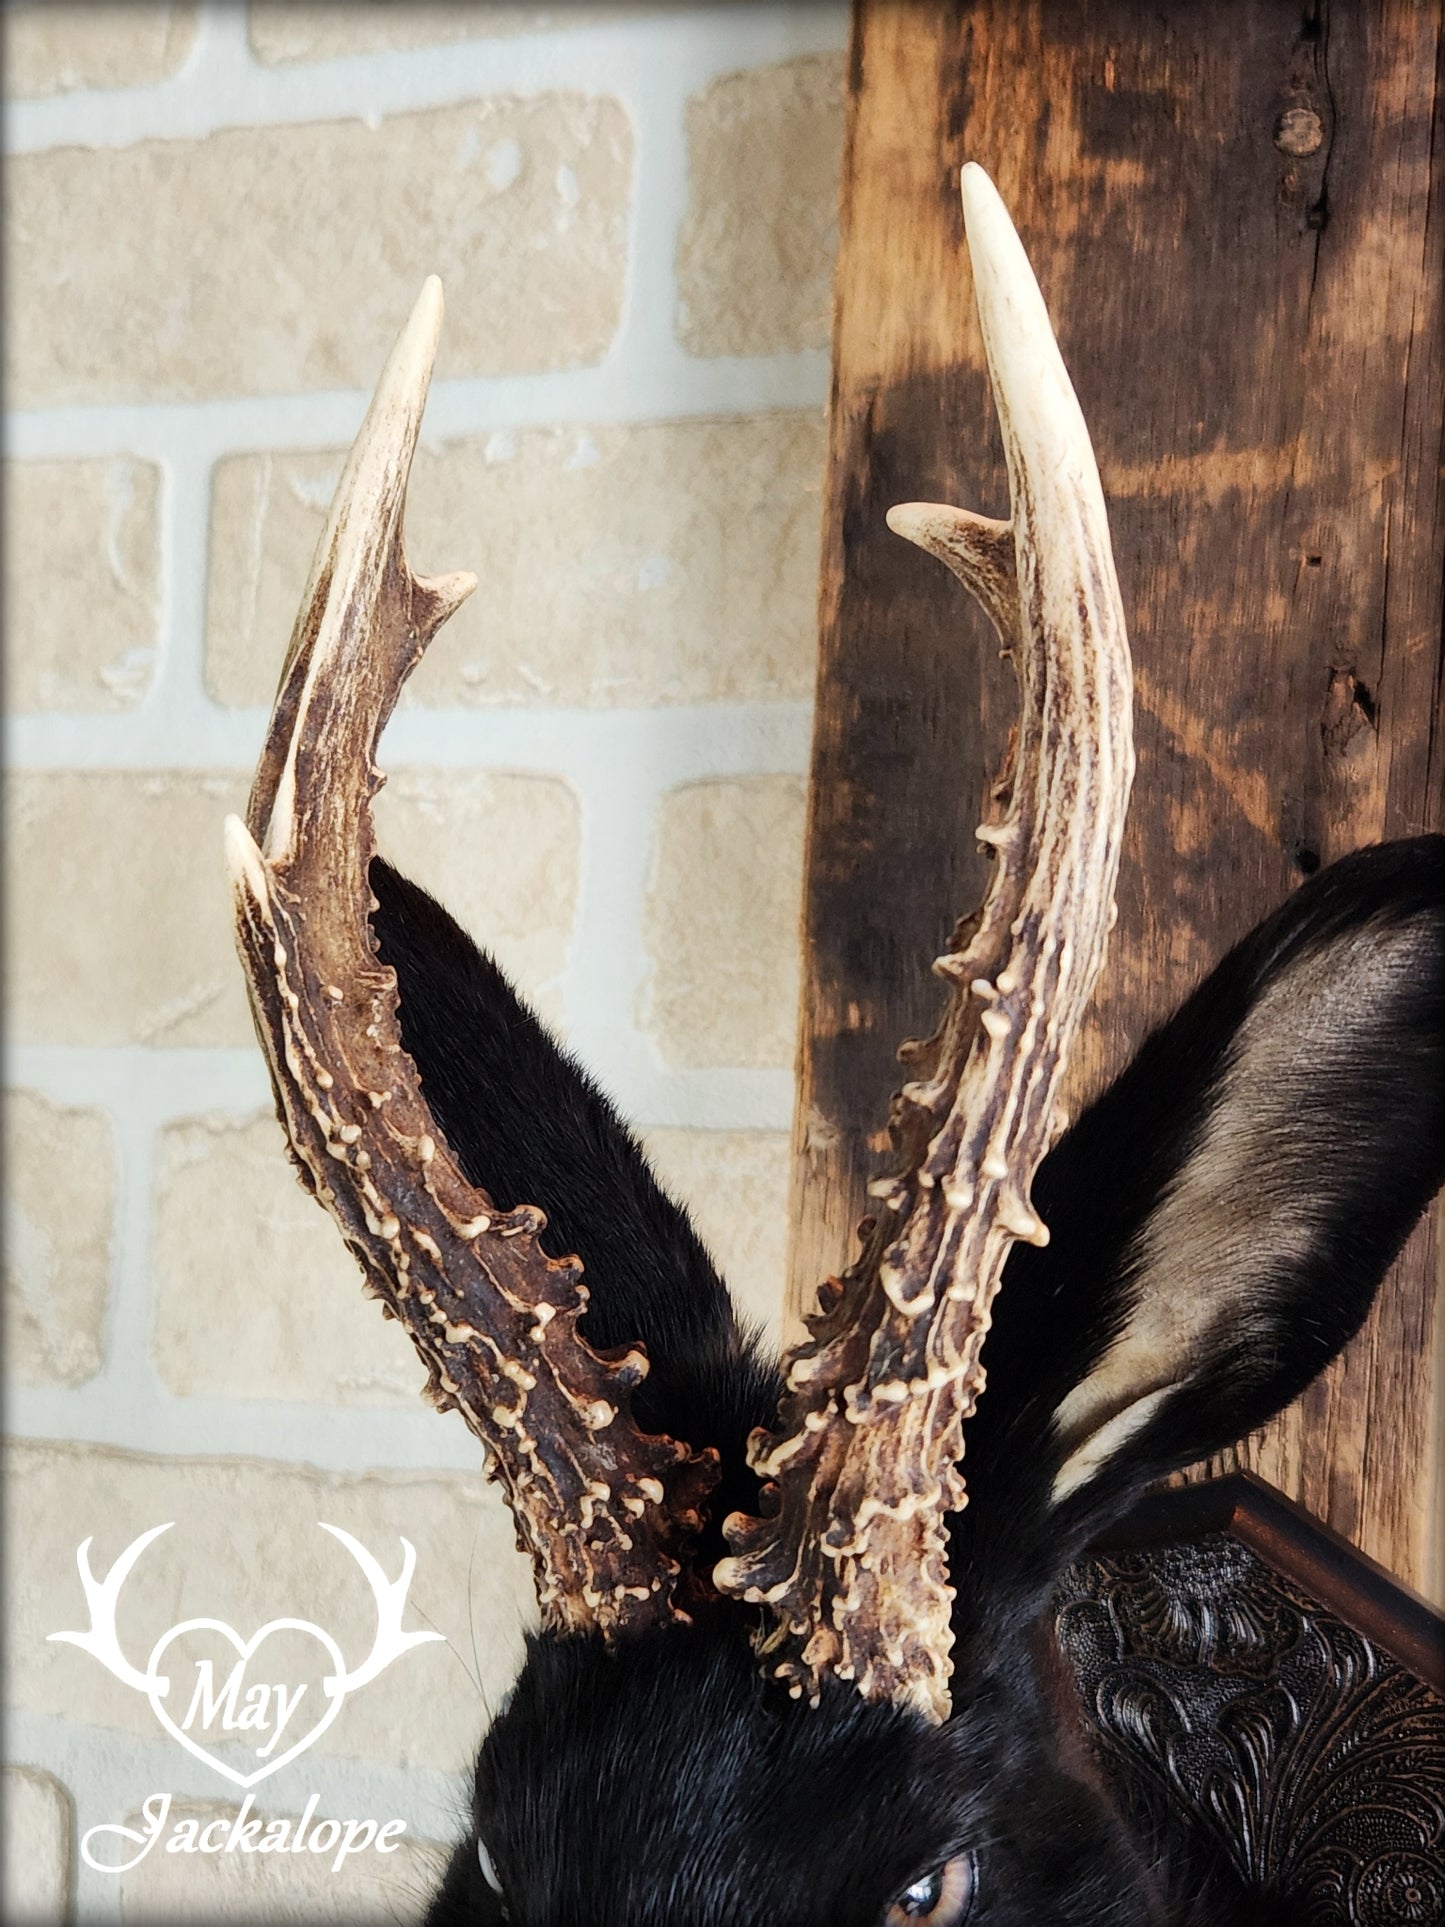 Black Jackalope taxidermy with hazel eyes, real antlers, necklace & on a decorated plaque